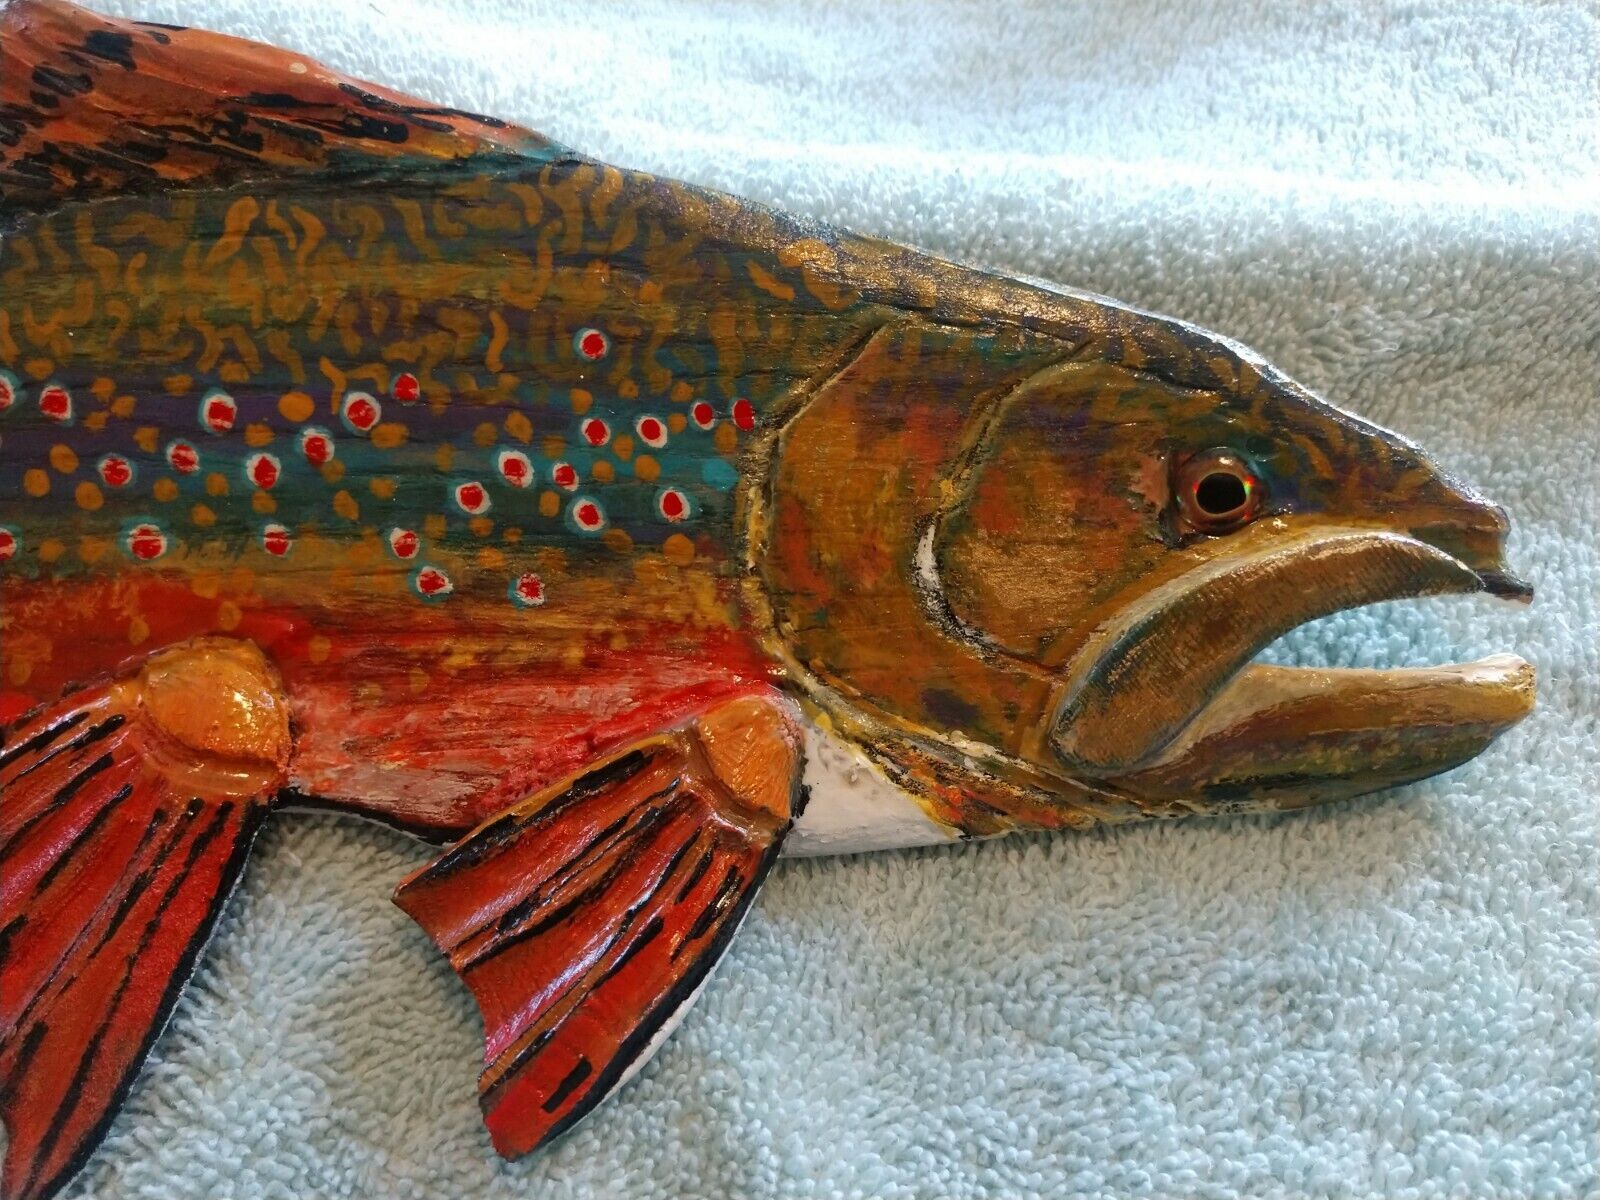 Primary image for 2019,**For Sale**, "Brook Trout", 15 1/4 Inches, Spawning Colors*****